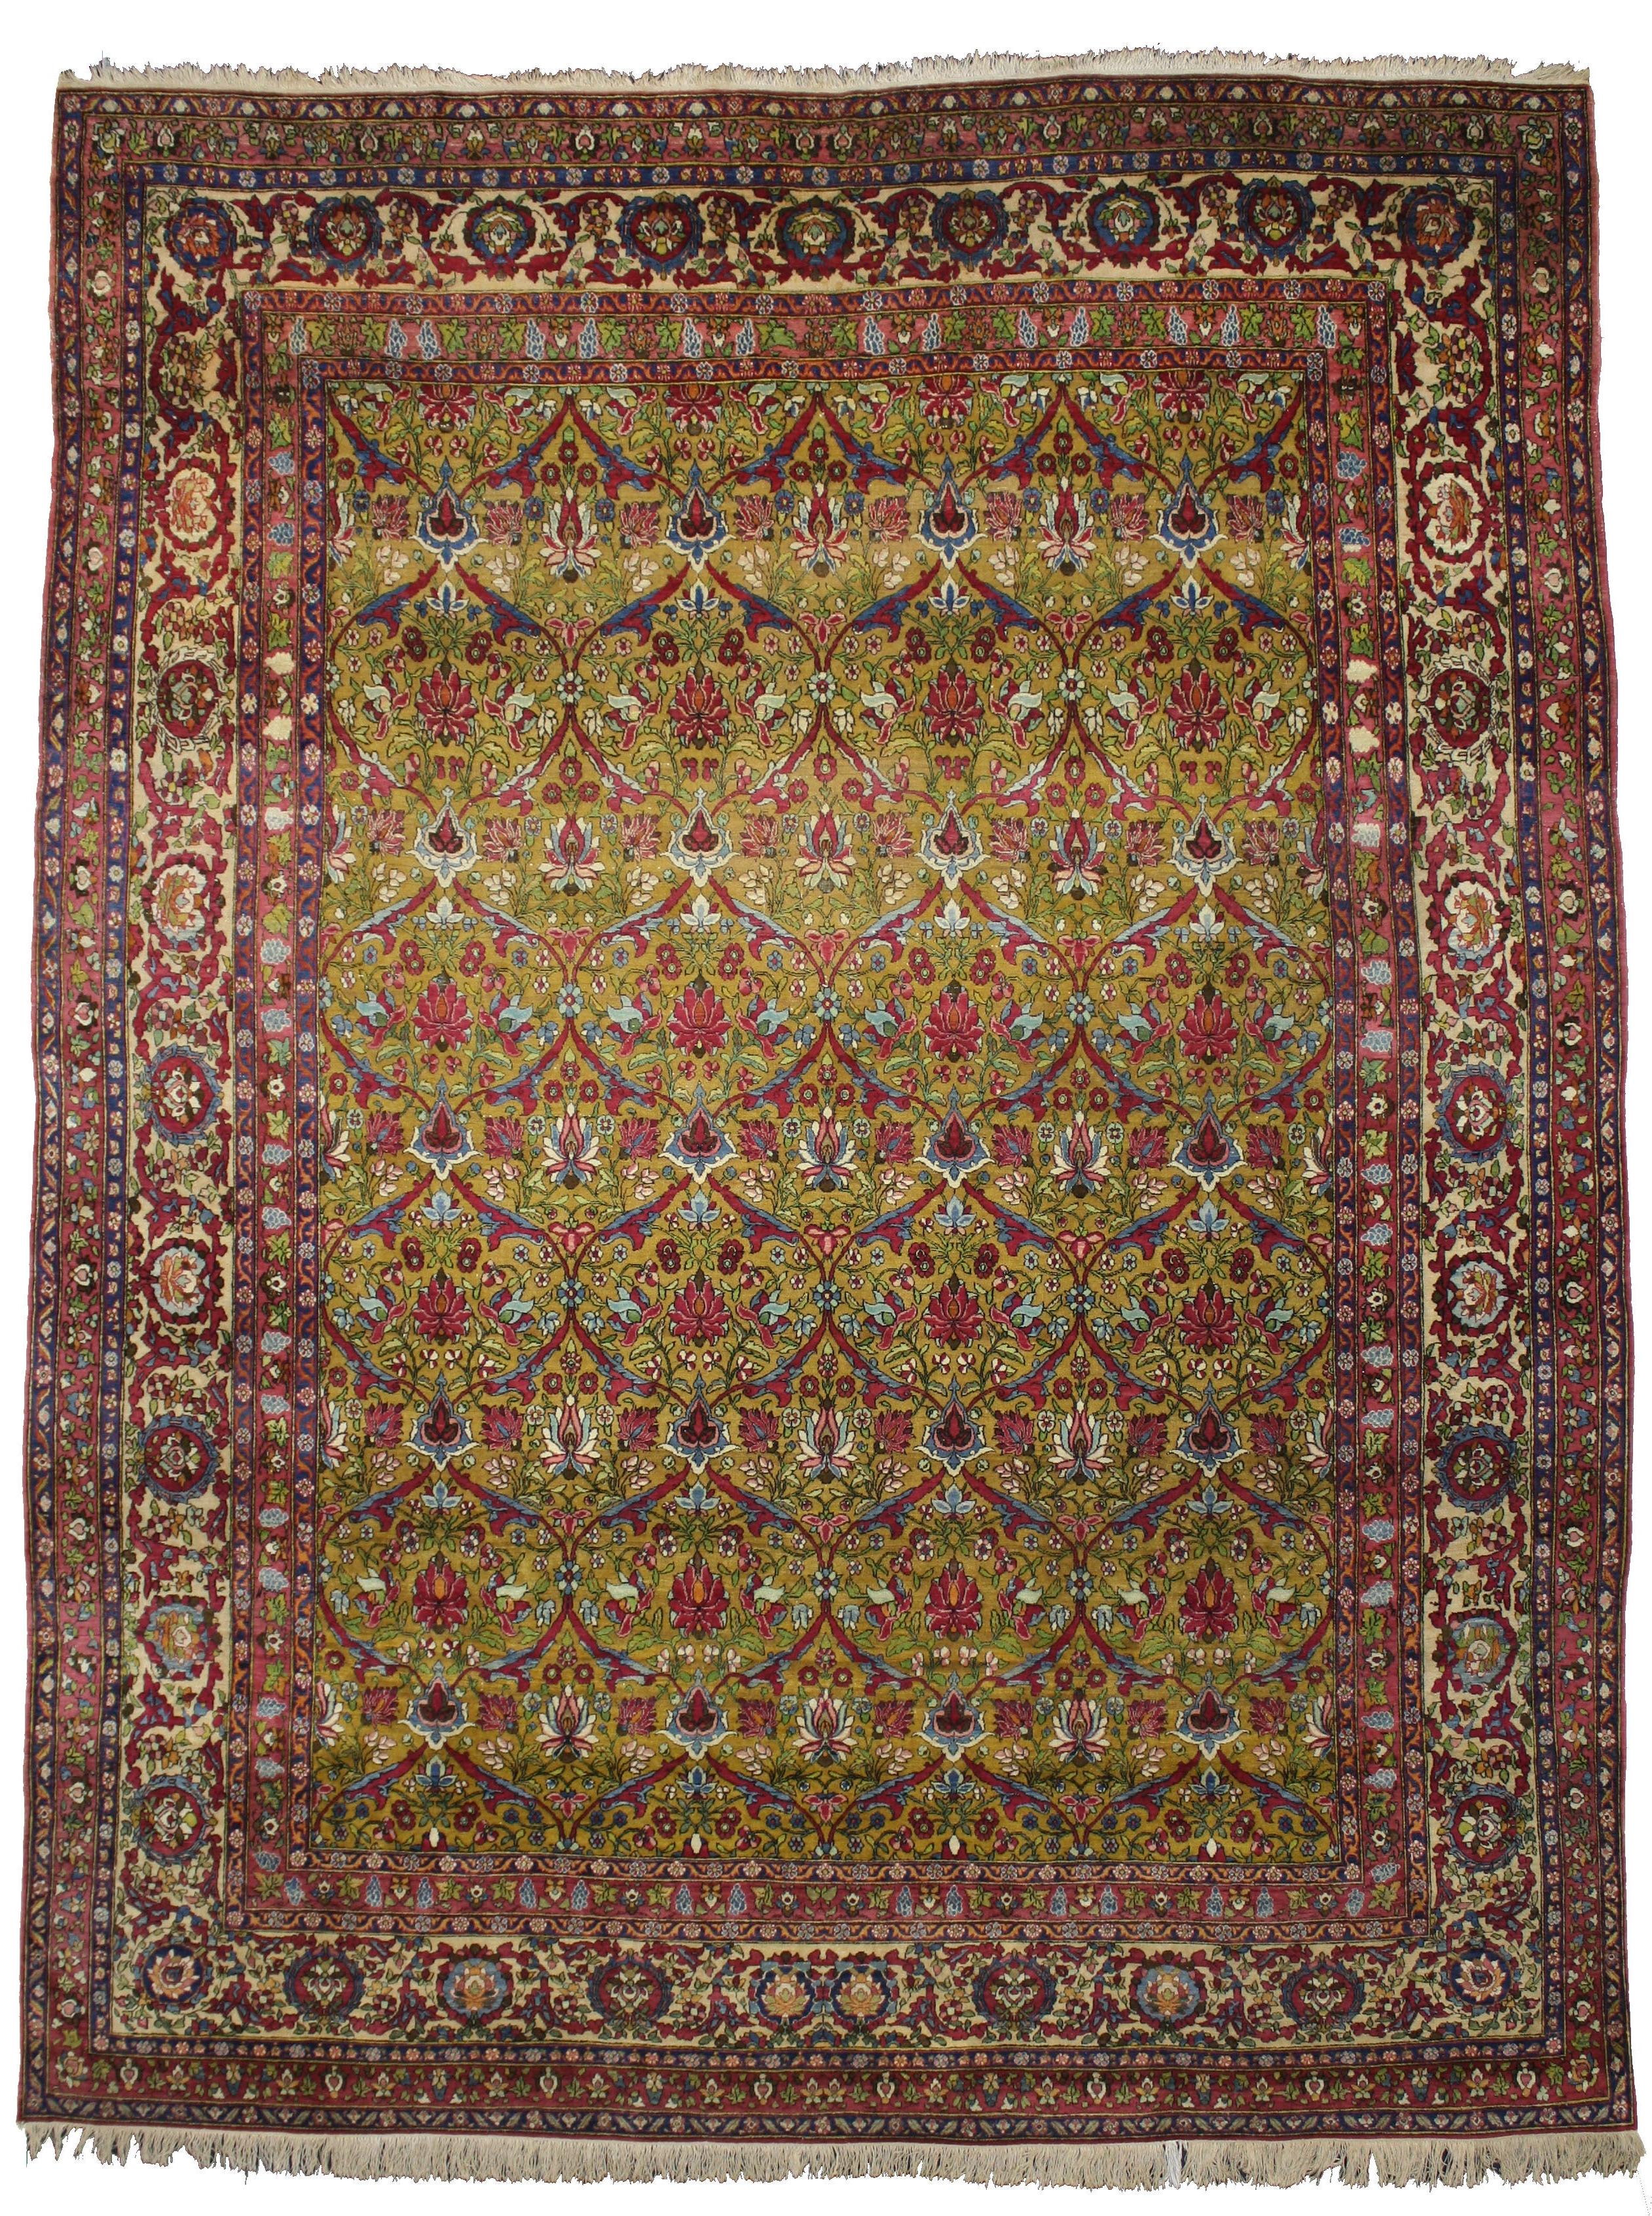 Antique Persian Isfahan Rug, Old World Charm Meets French Baroque Style